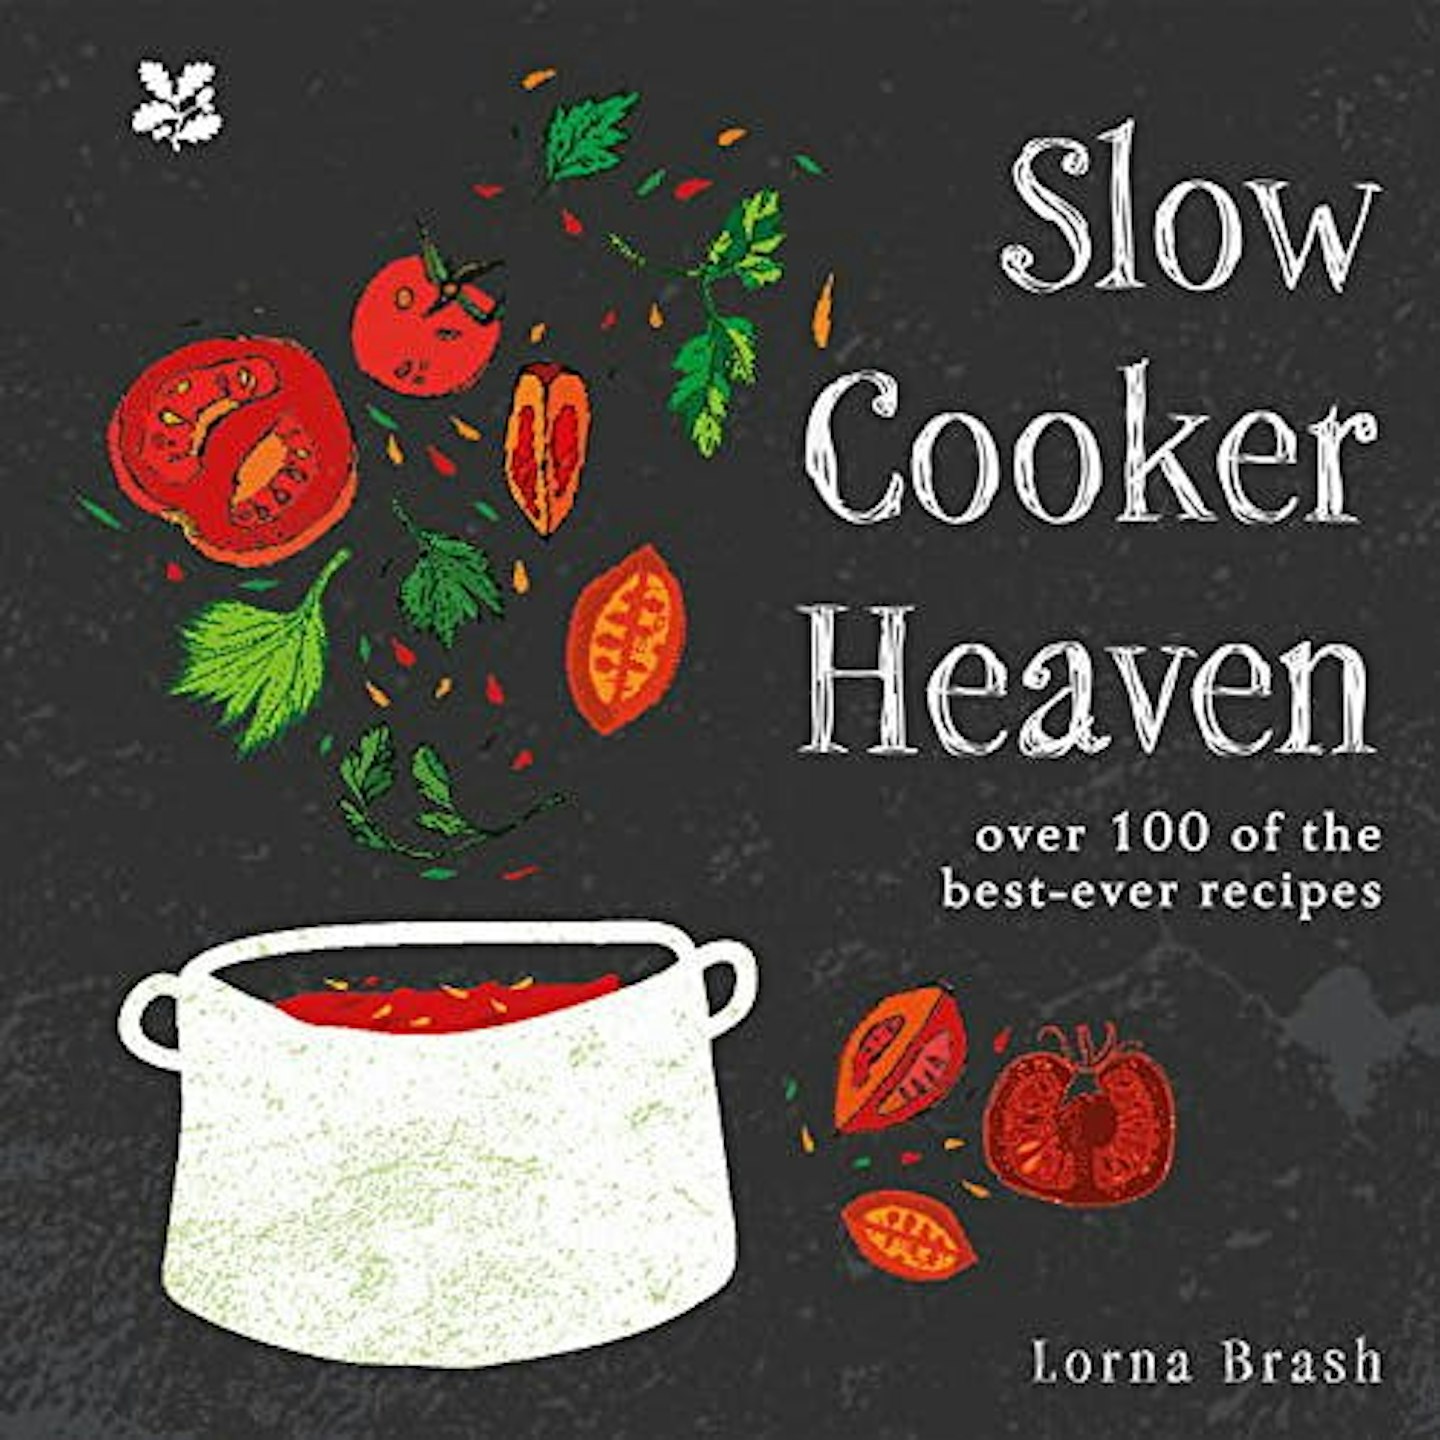 Slow Cooker Heaven: Over 100 of the Best-Ever Recipes